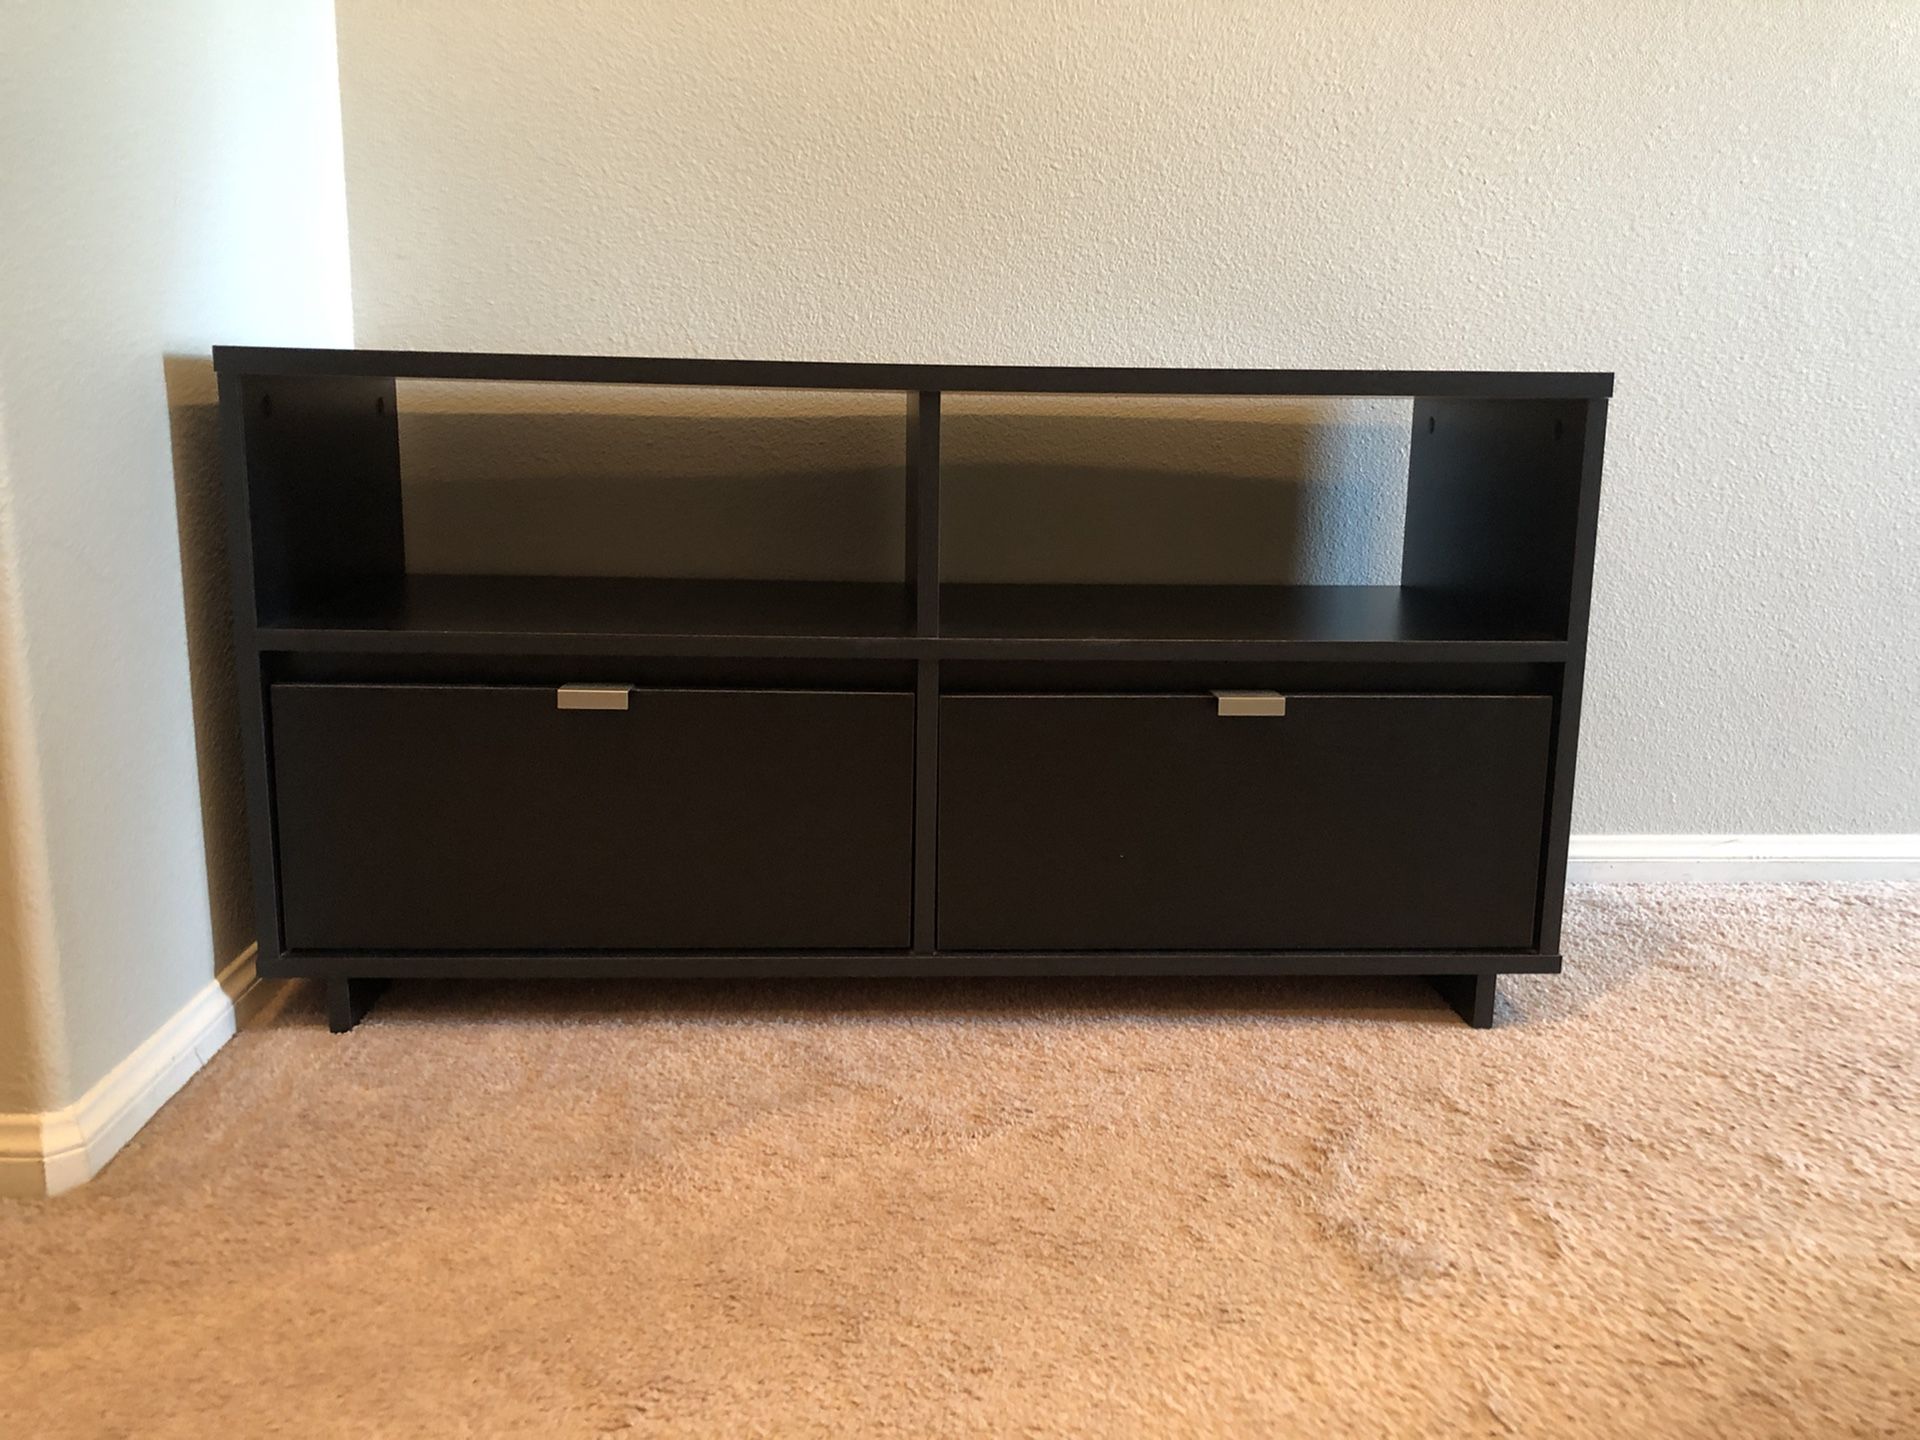 Furniture black with drawers